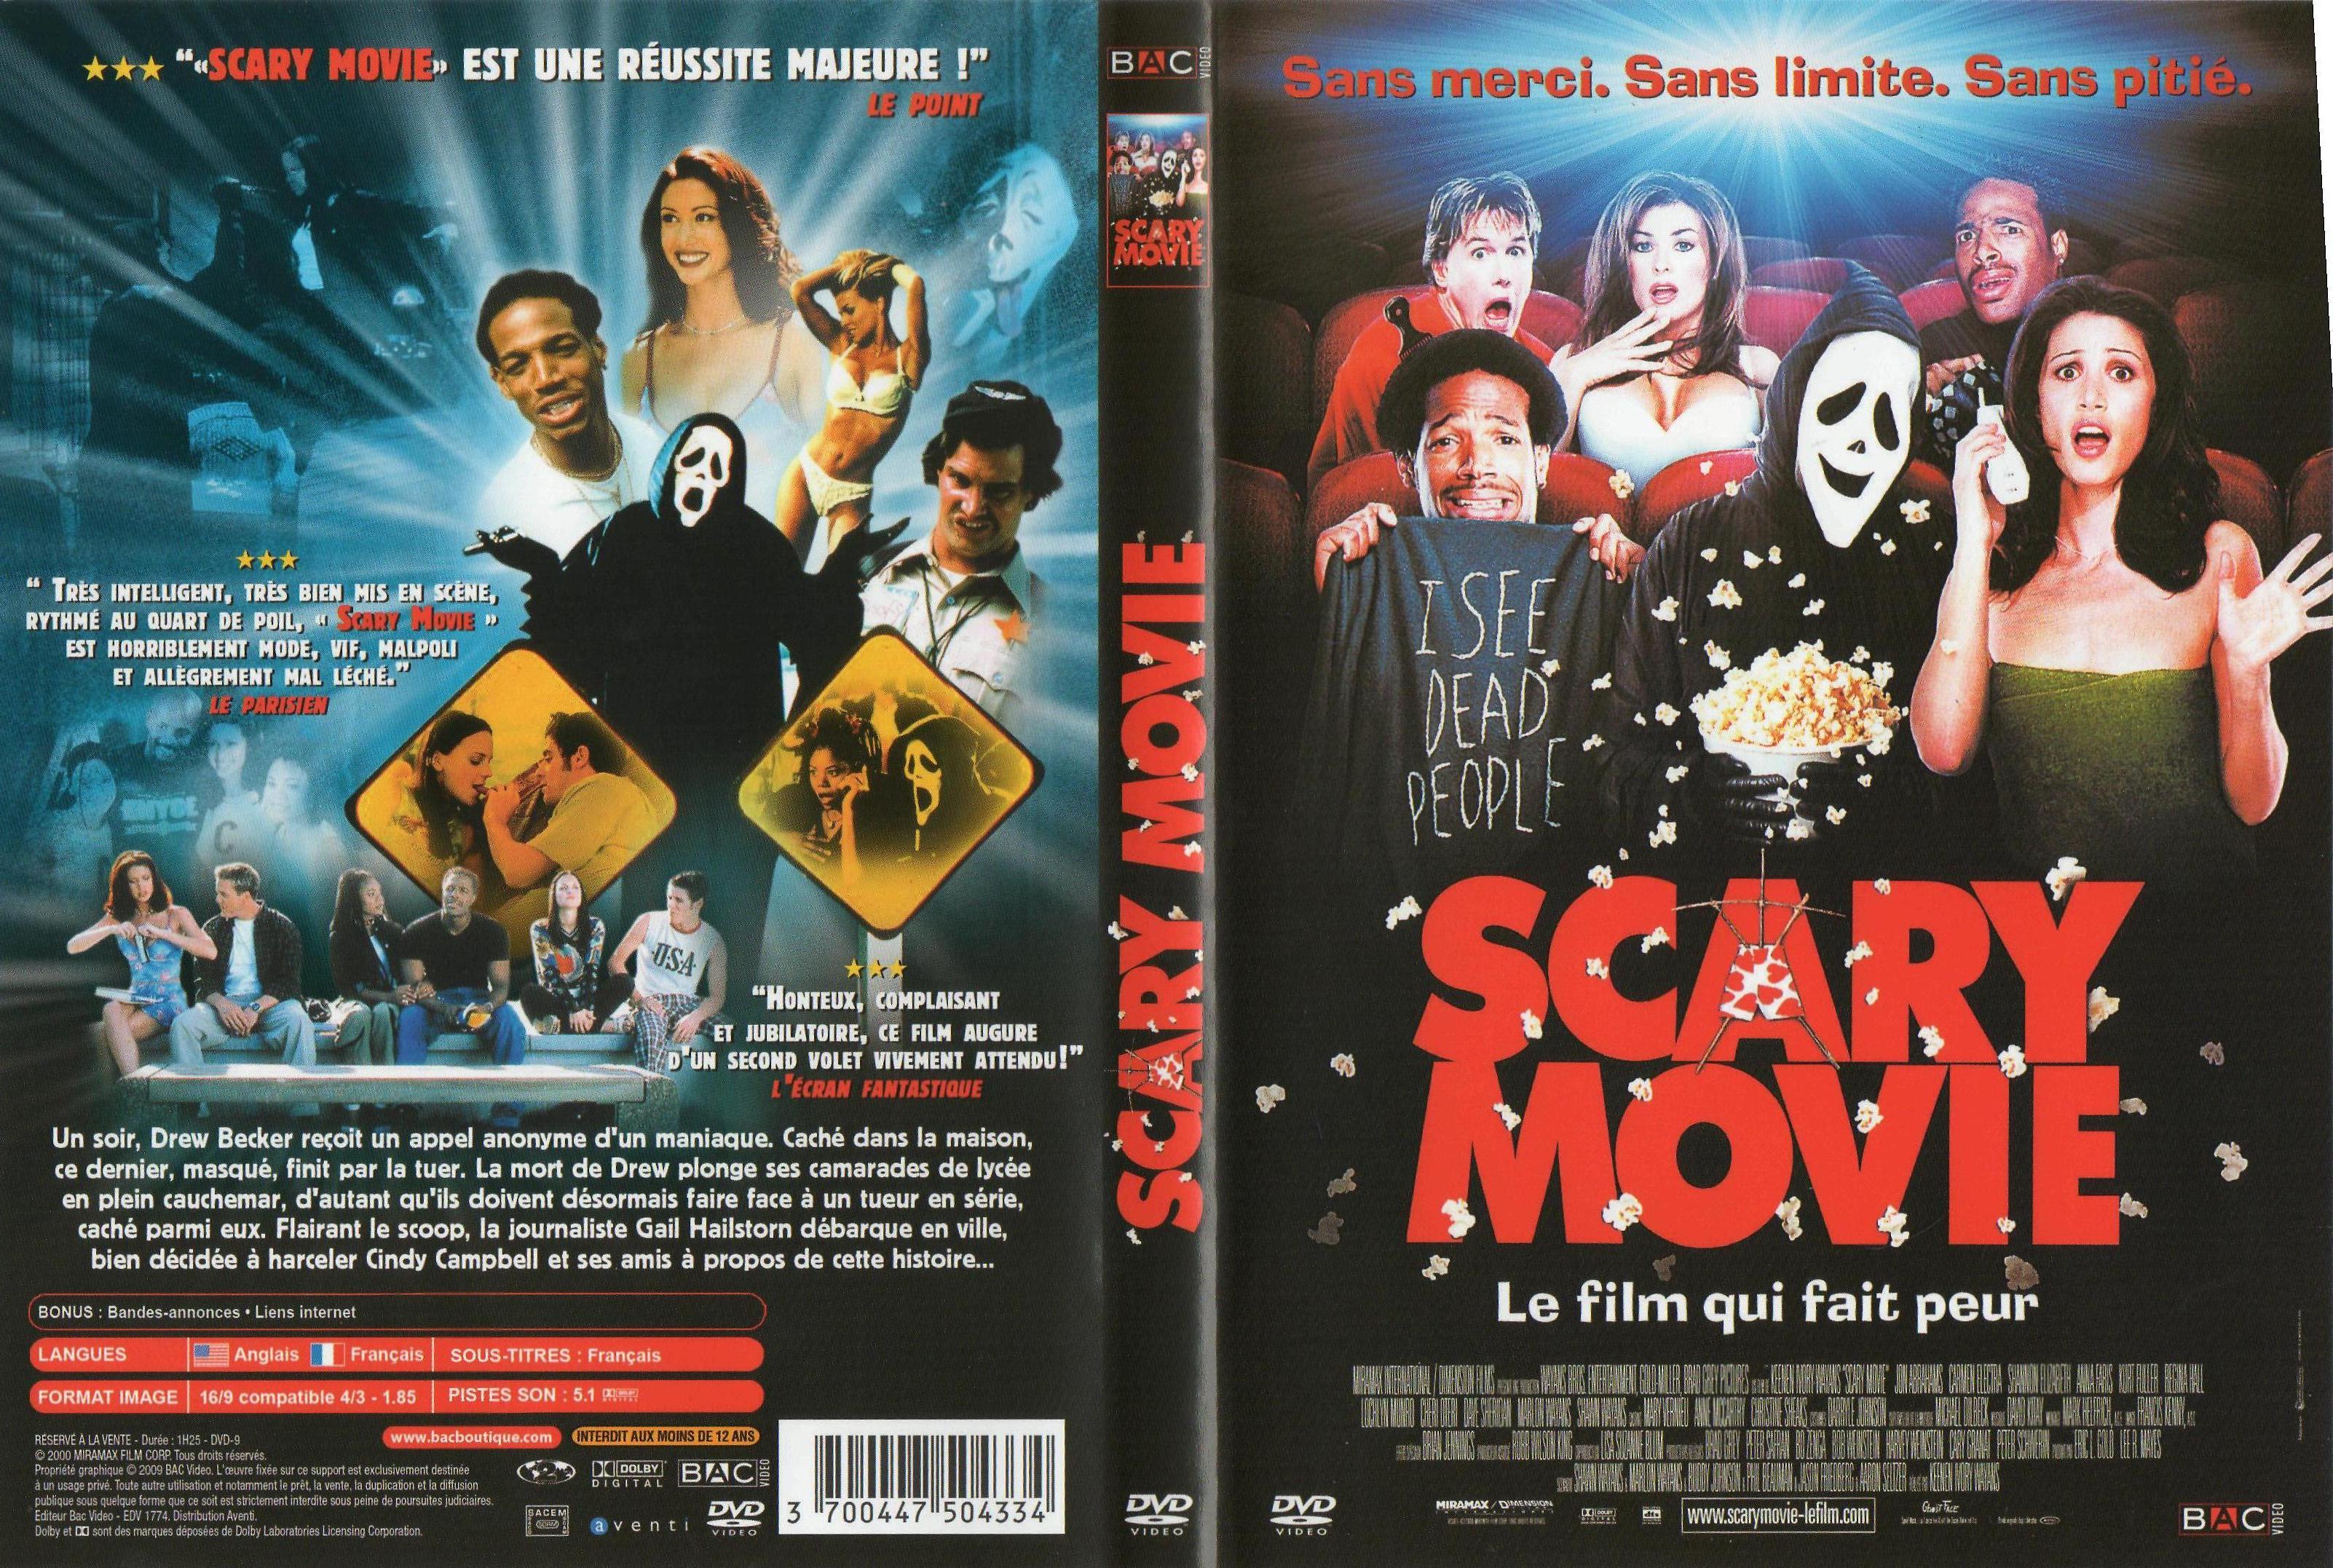 Jaquette DVD Scary movie v4